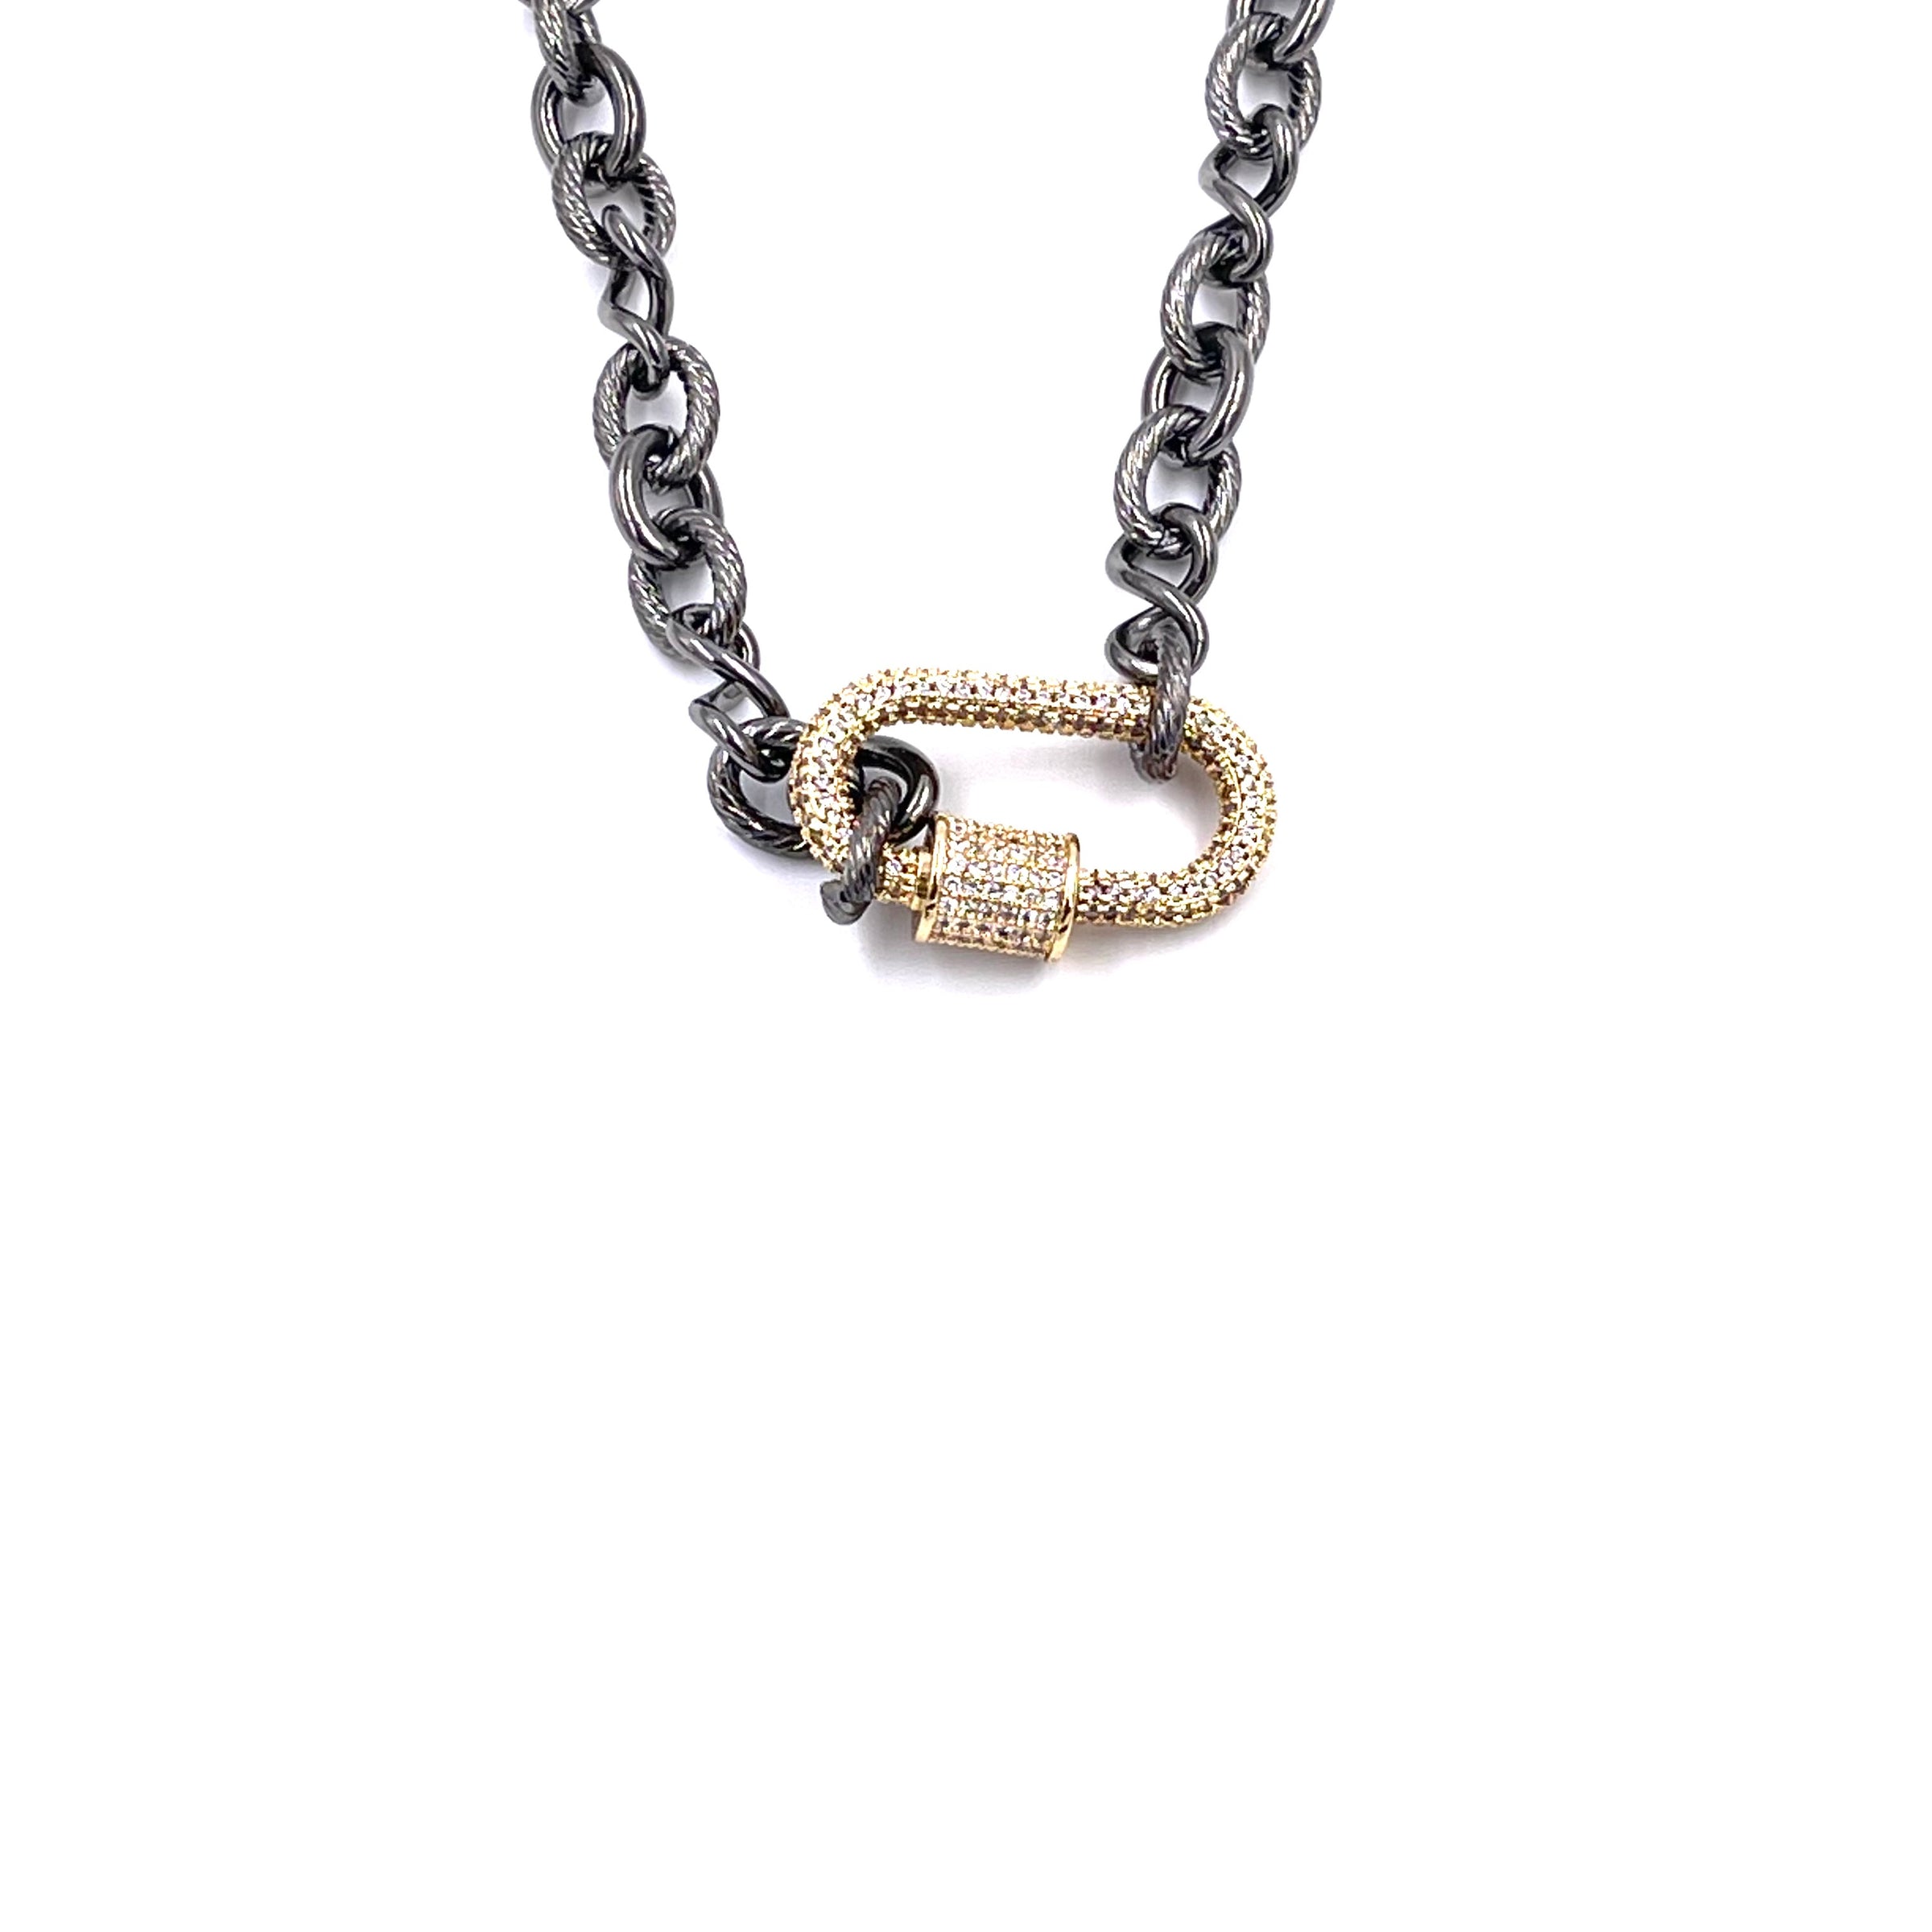 Ashley Gold Stainless Steel Gold Plated Large Lock Necklace